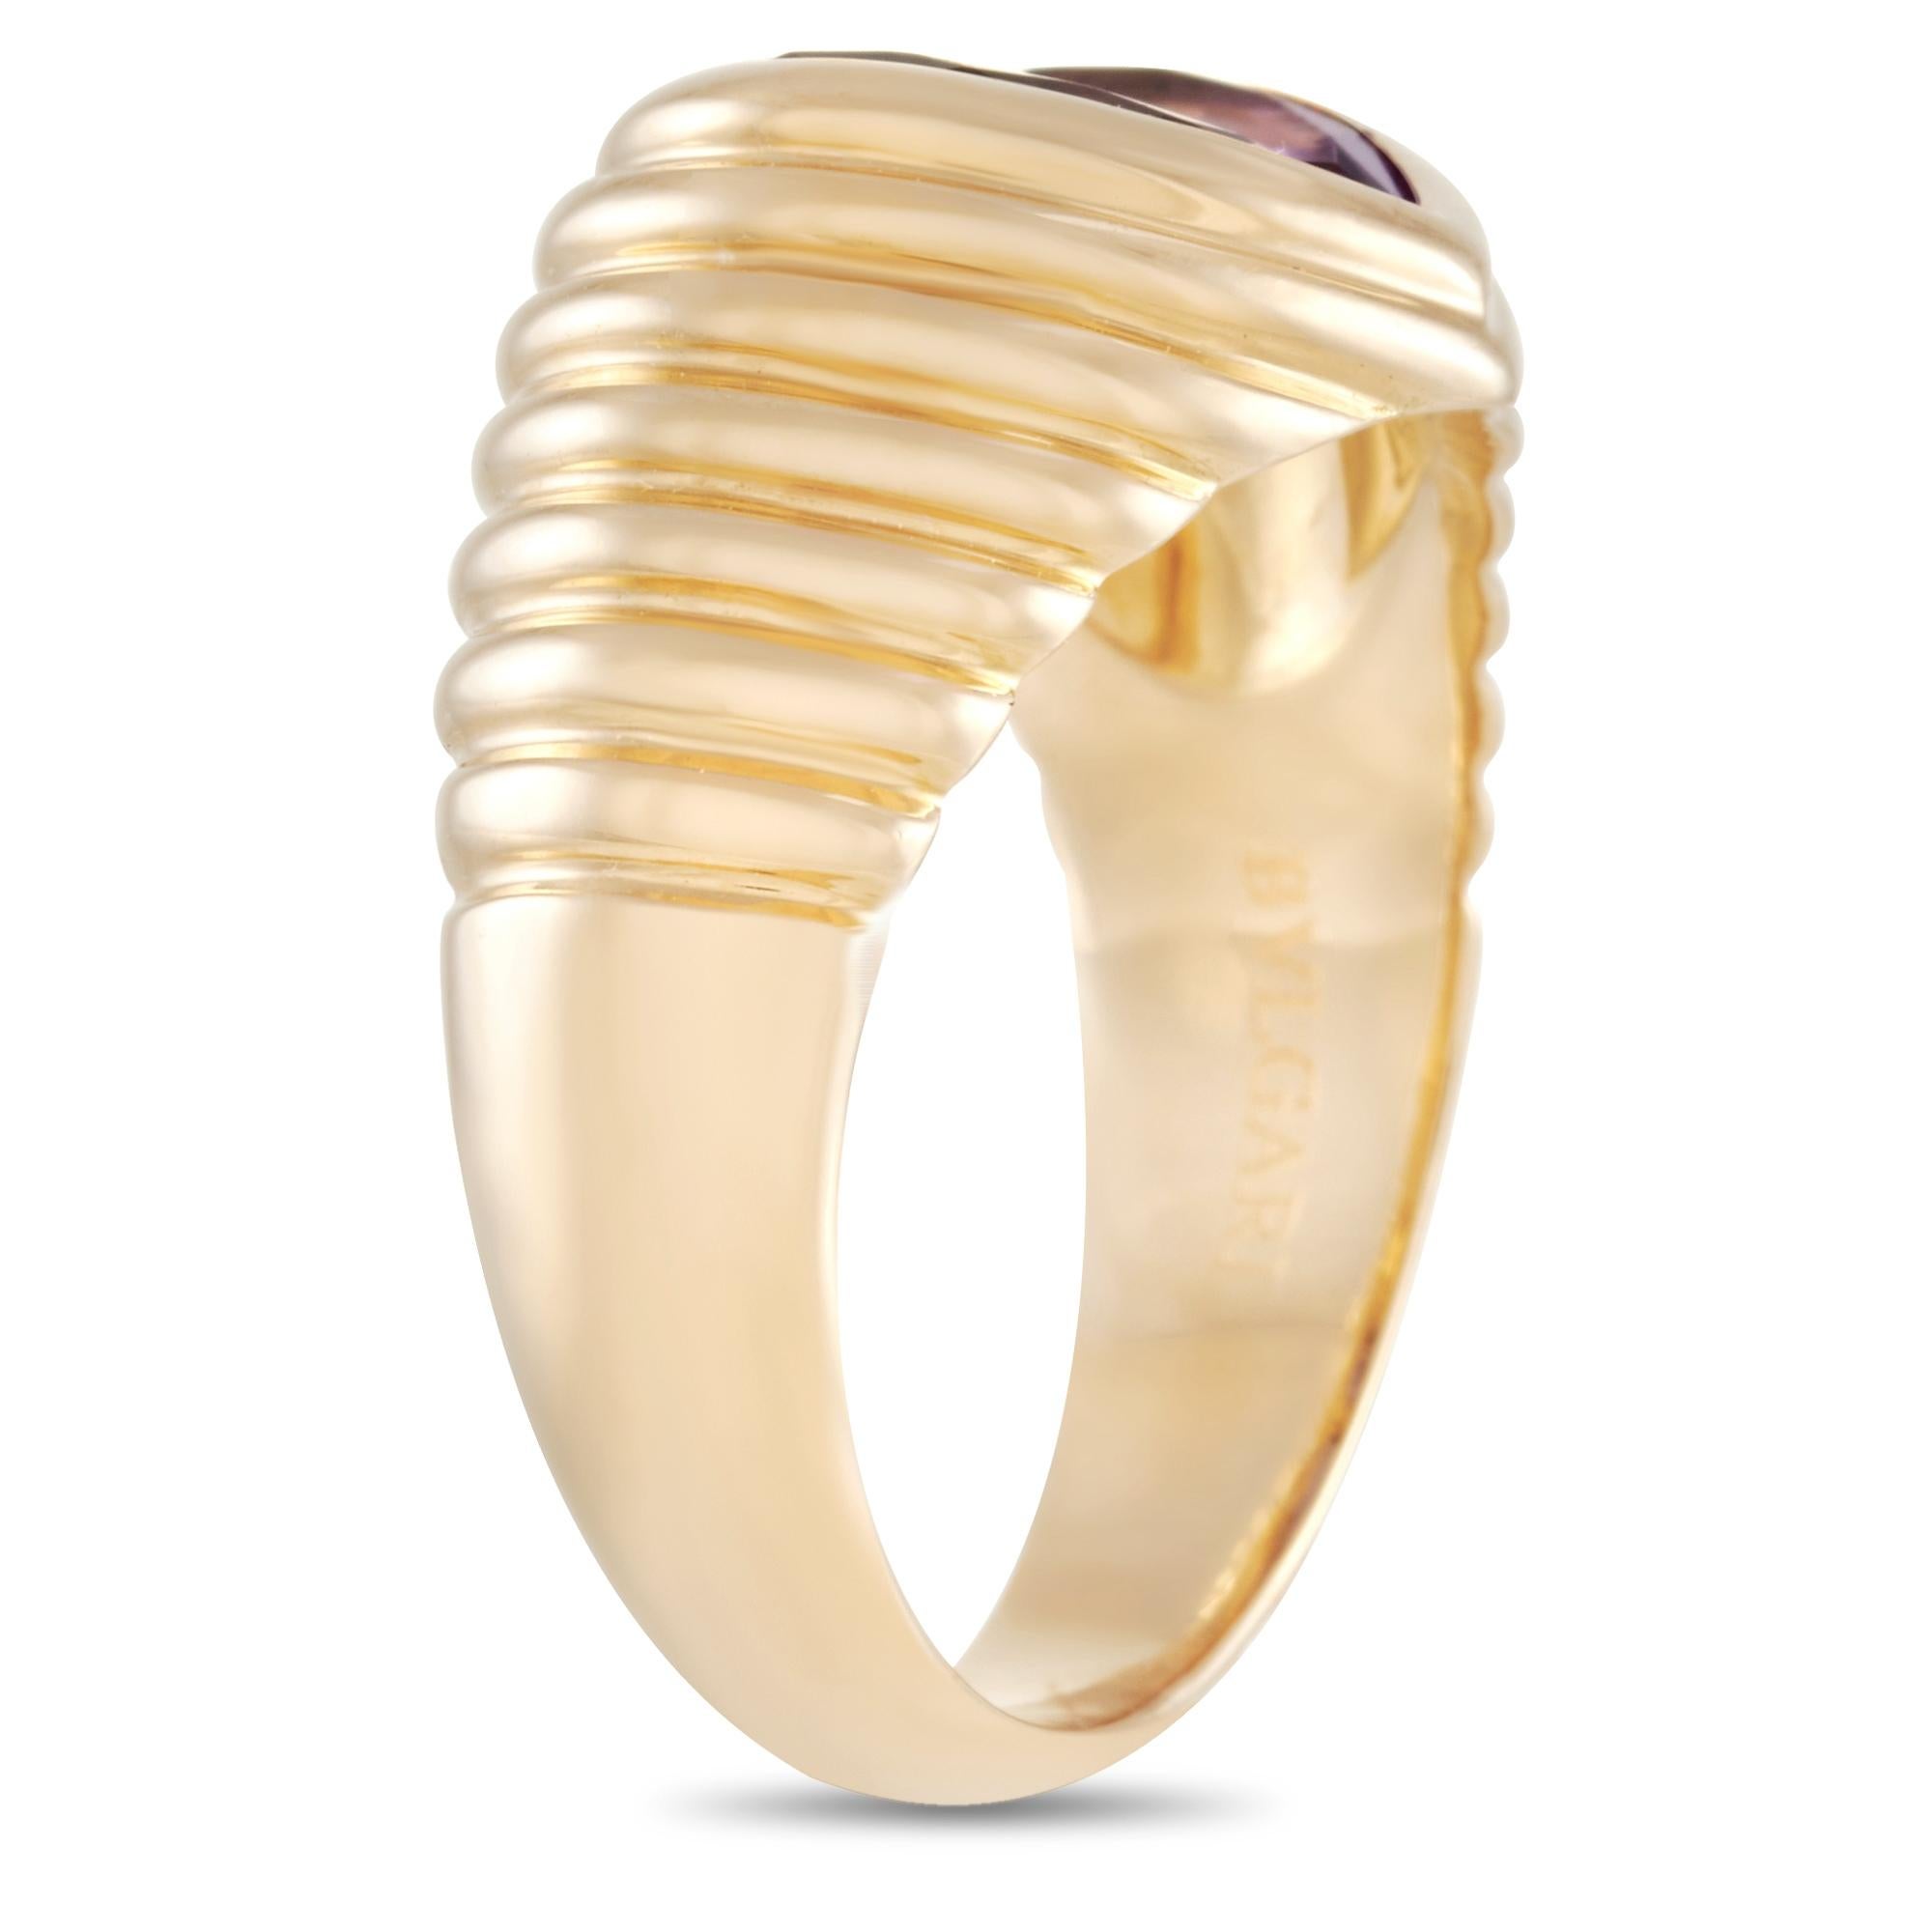 A statement ring ready to captivate you with its bejeweled charm. The Bvlgari 18K Yellow Gold Doppio Ring features a textured 5mm yellow gold band set with an amethyst gemstone. The ring weighs 9.2 grams and has a top height of 4mm. Its top